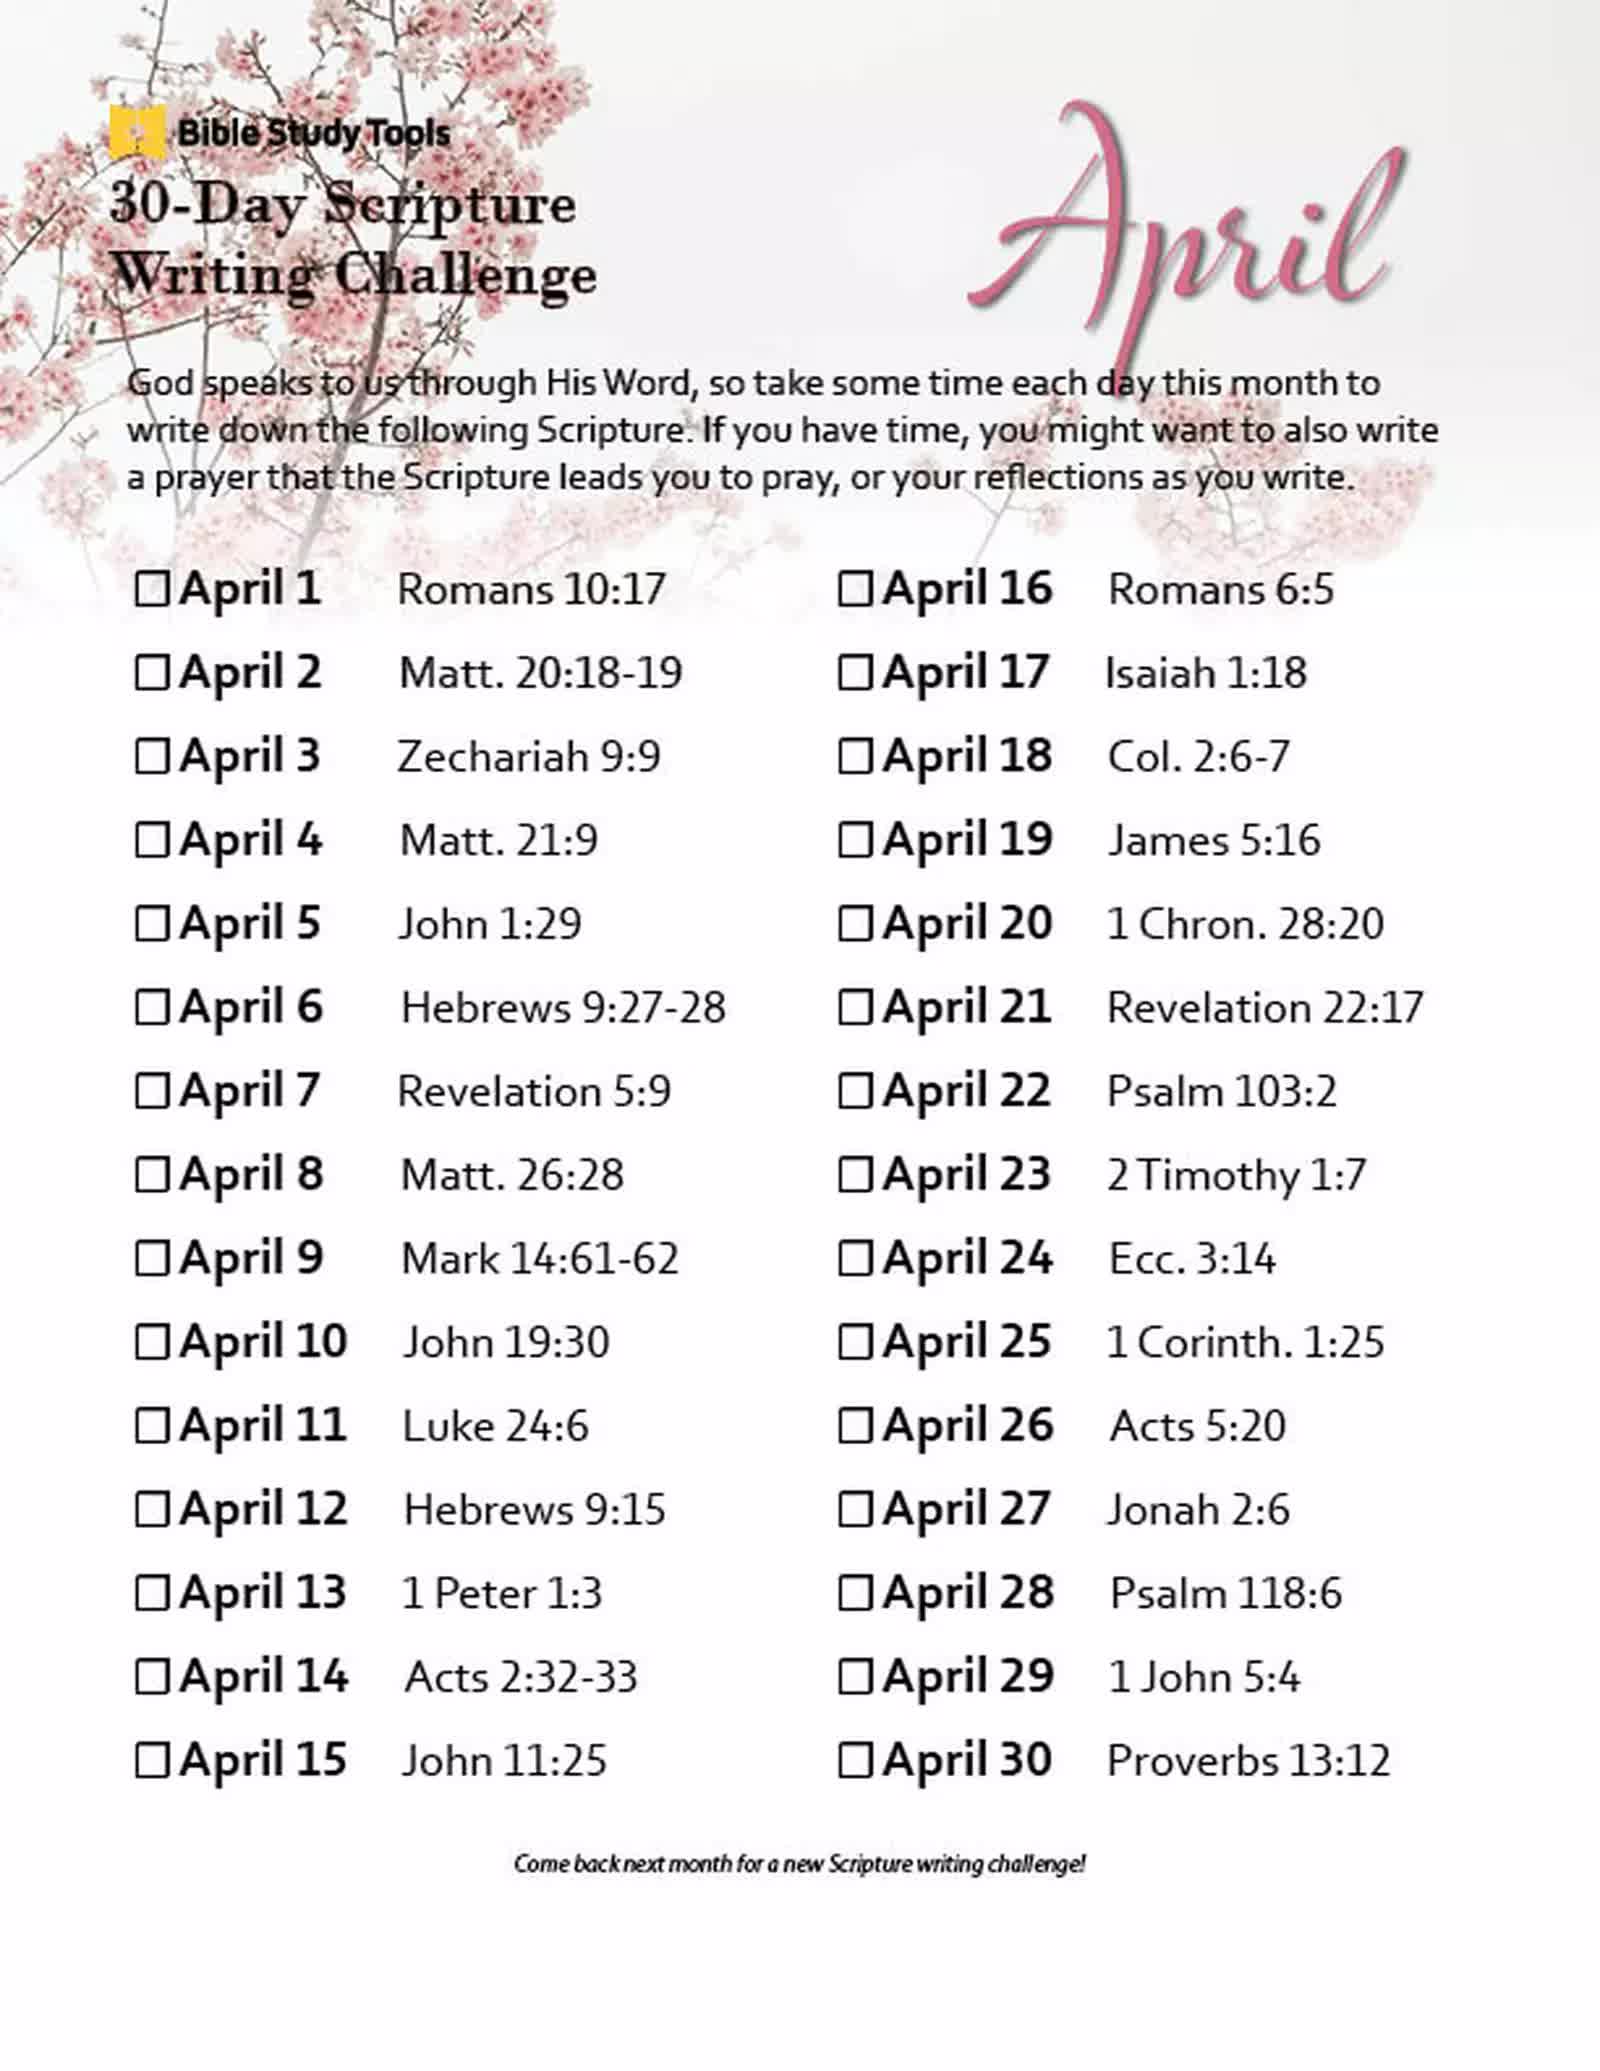 April's 30Day Scripture Writing Challenge Bible Study Tips